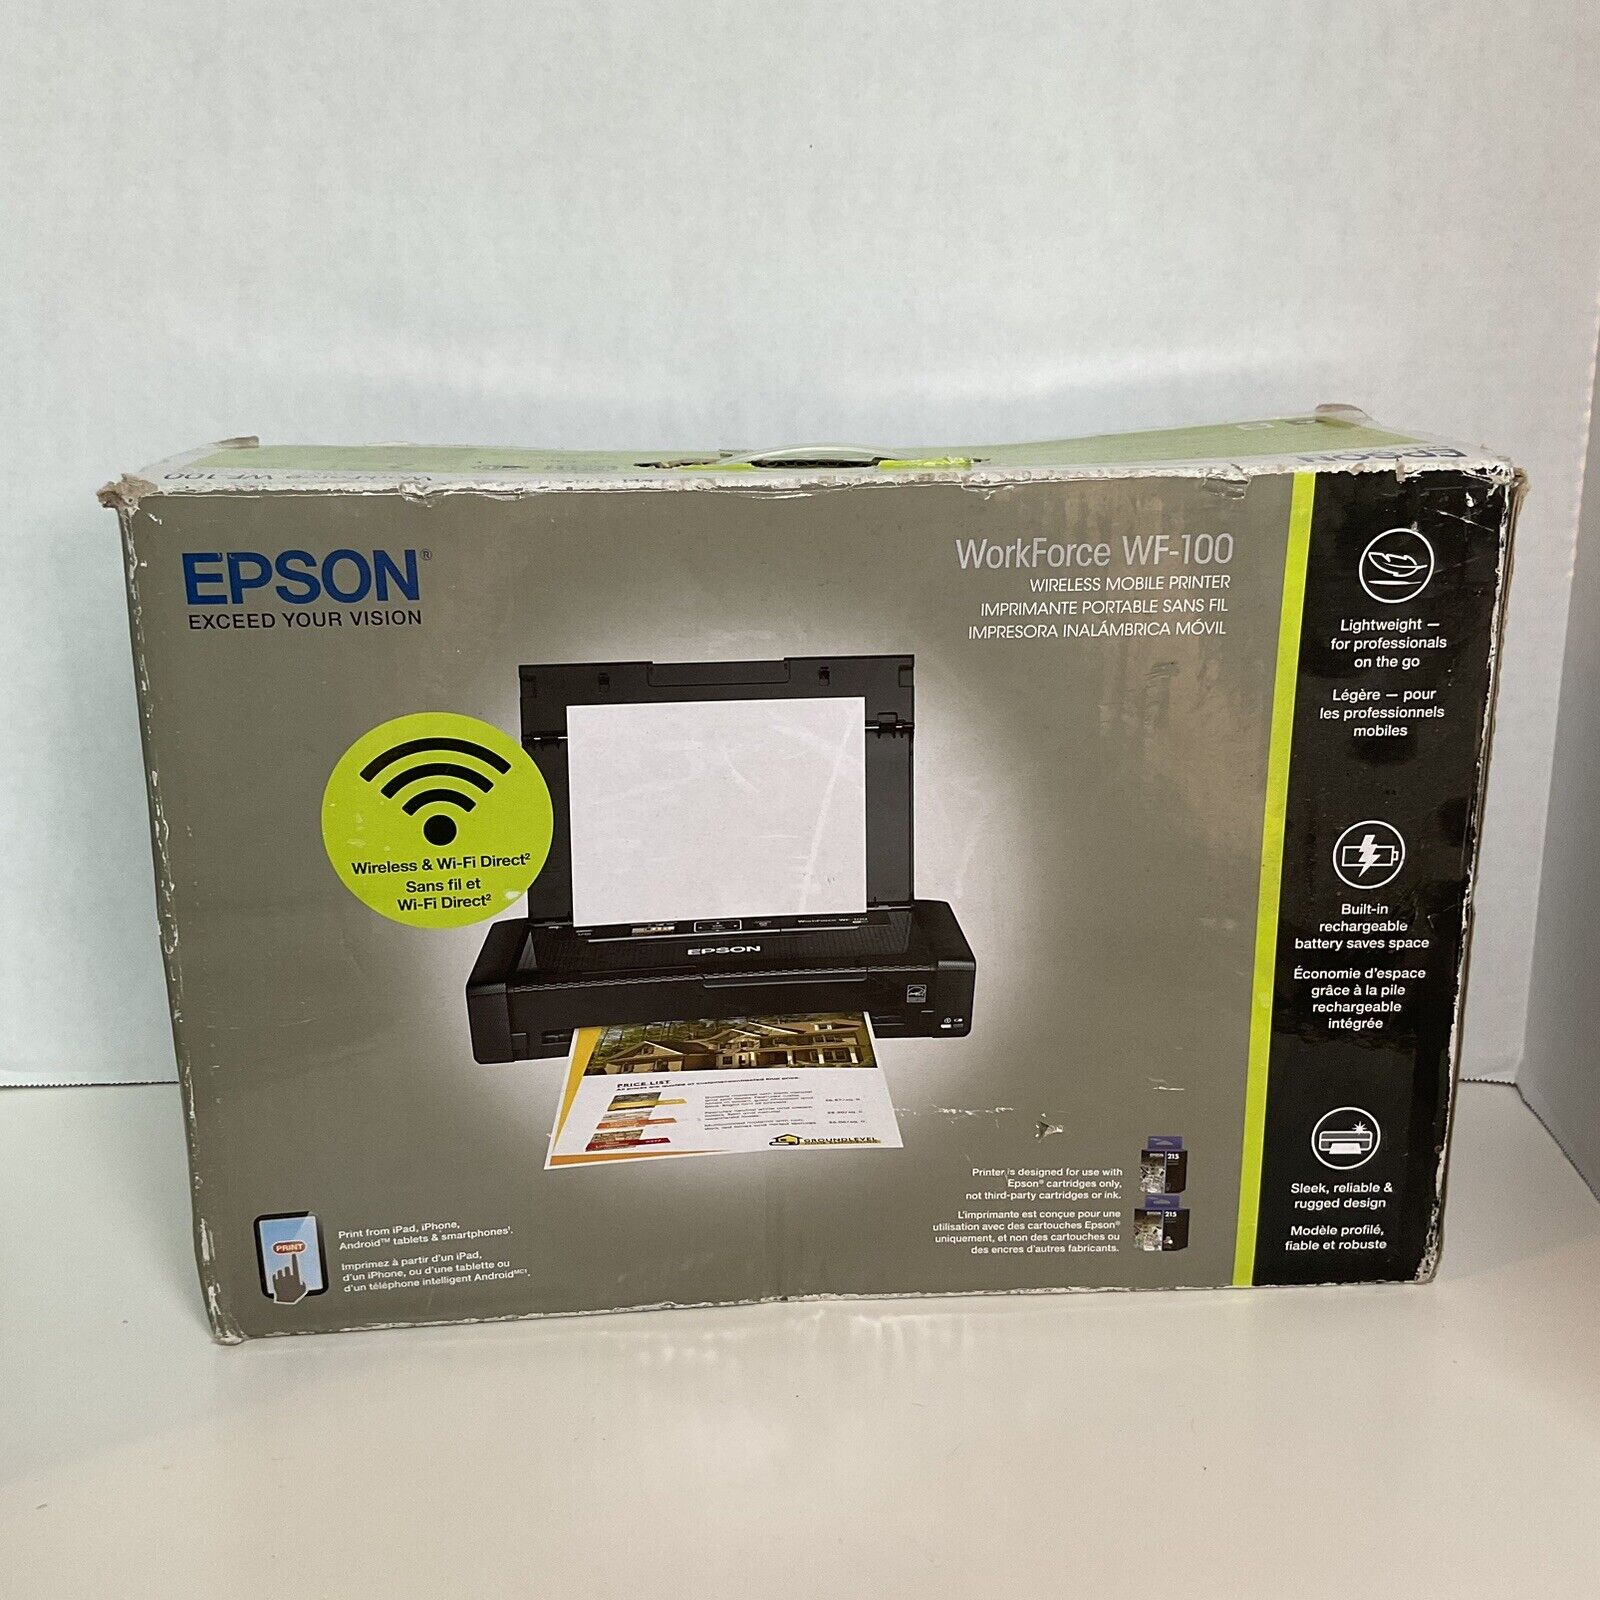 Epson Workforce WF-100 Wireless Mobile Printer - Doesn’t Include Power Cord